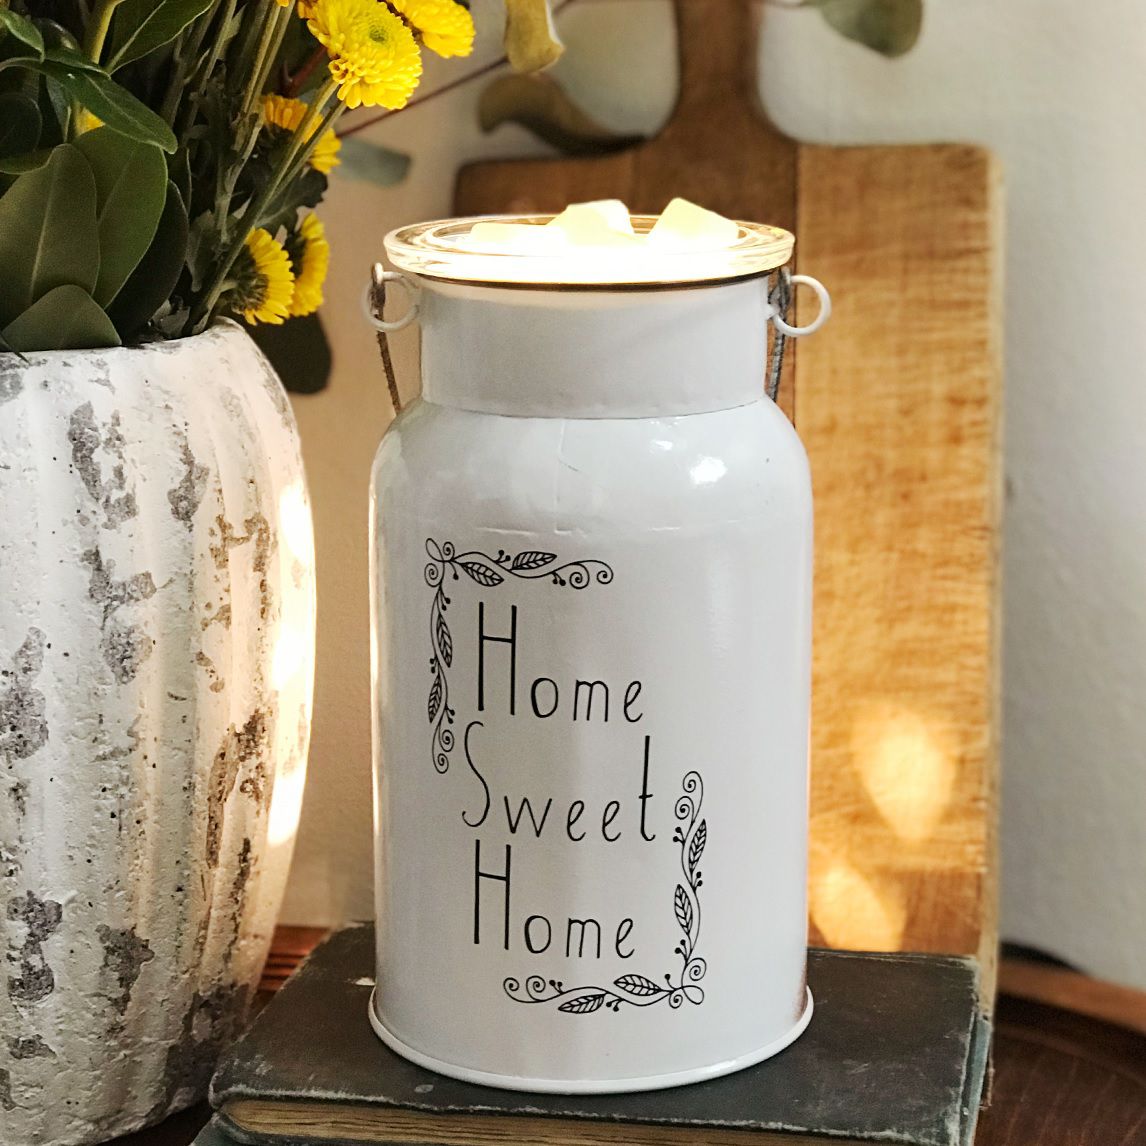 Home At Last Scentsy Warmer Alt